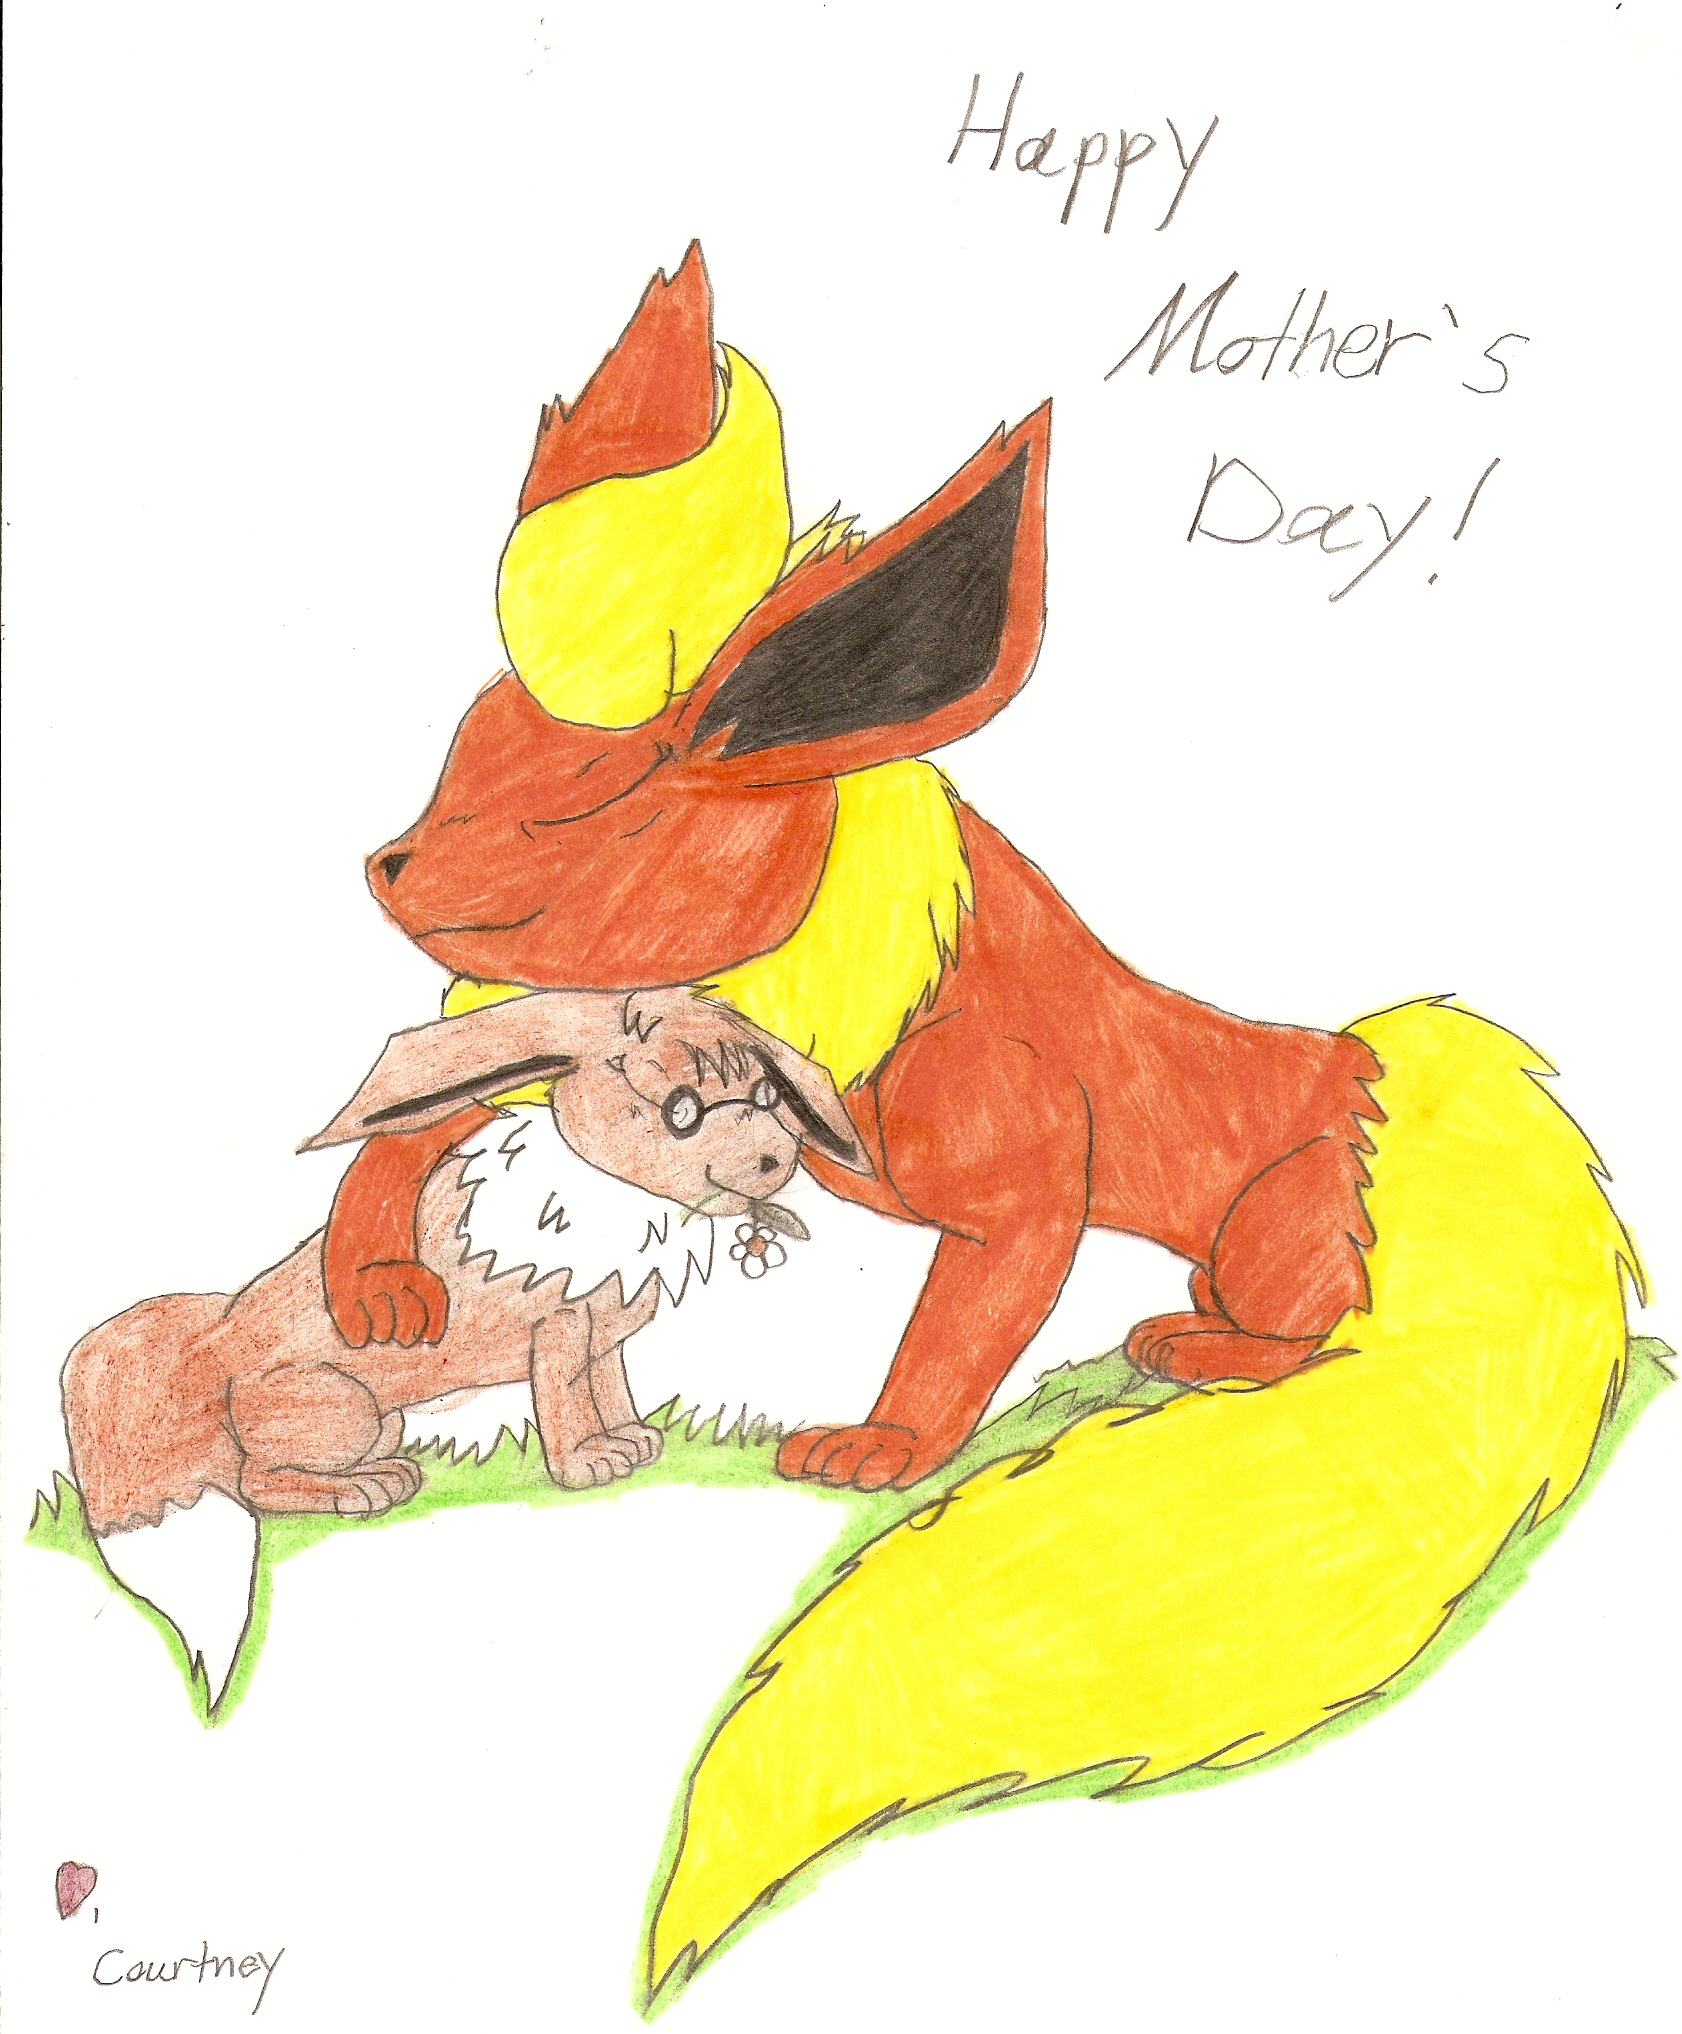 My Mother's Day gift for my mom by Aquaberry15